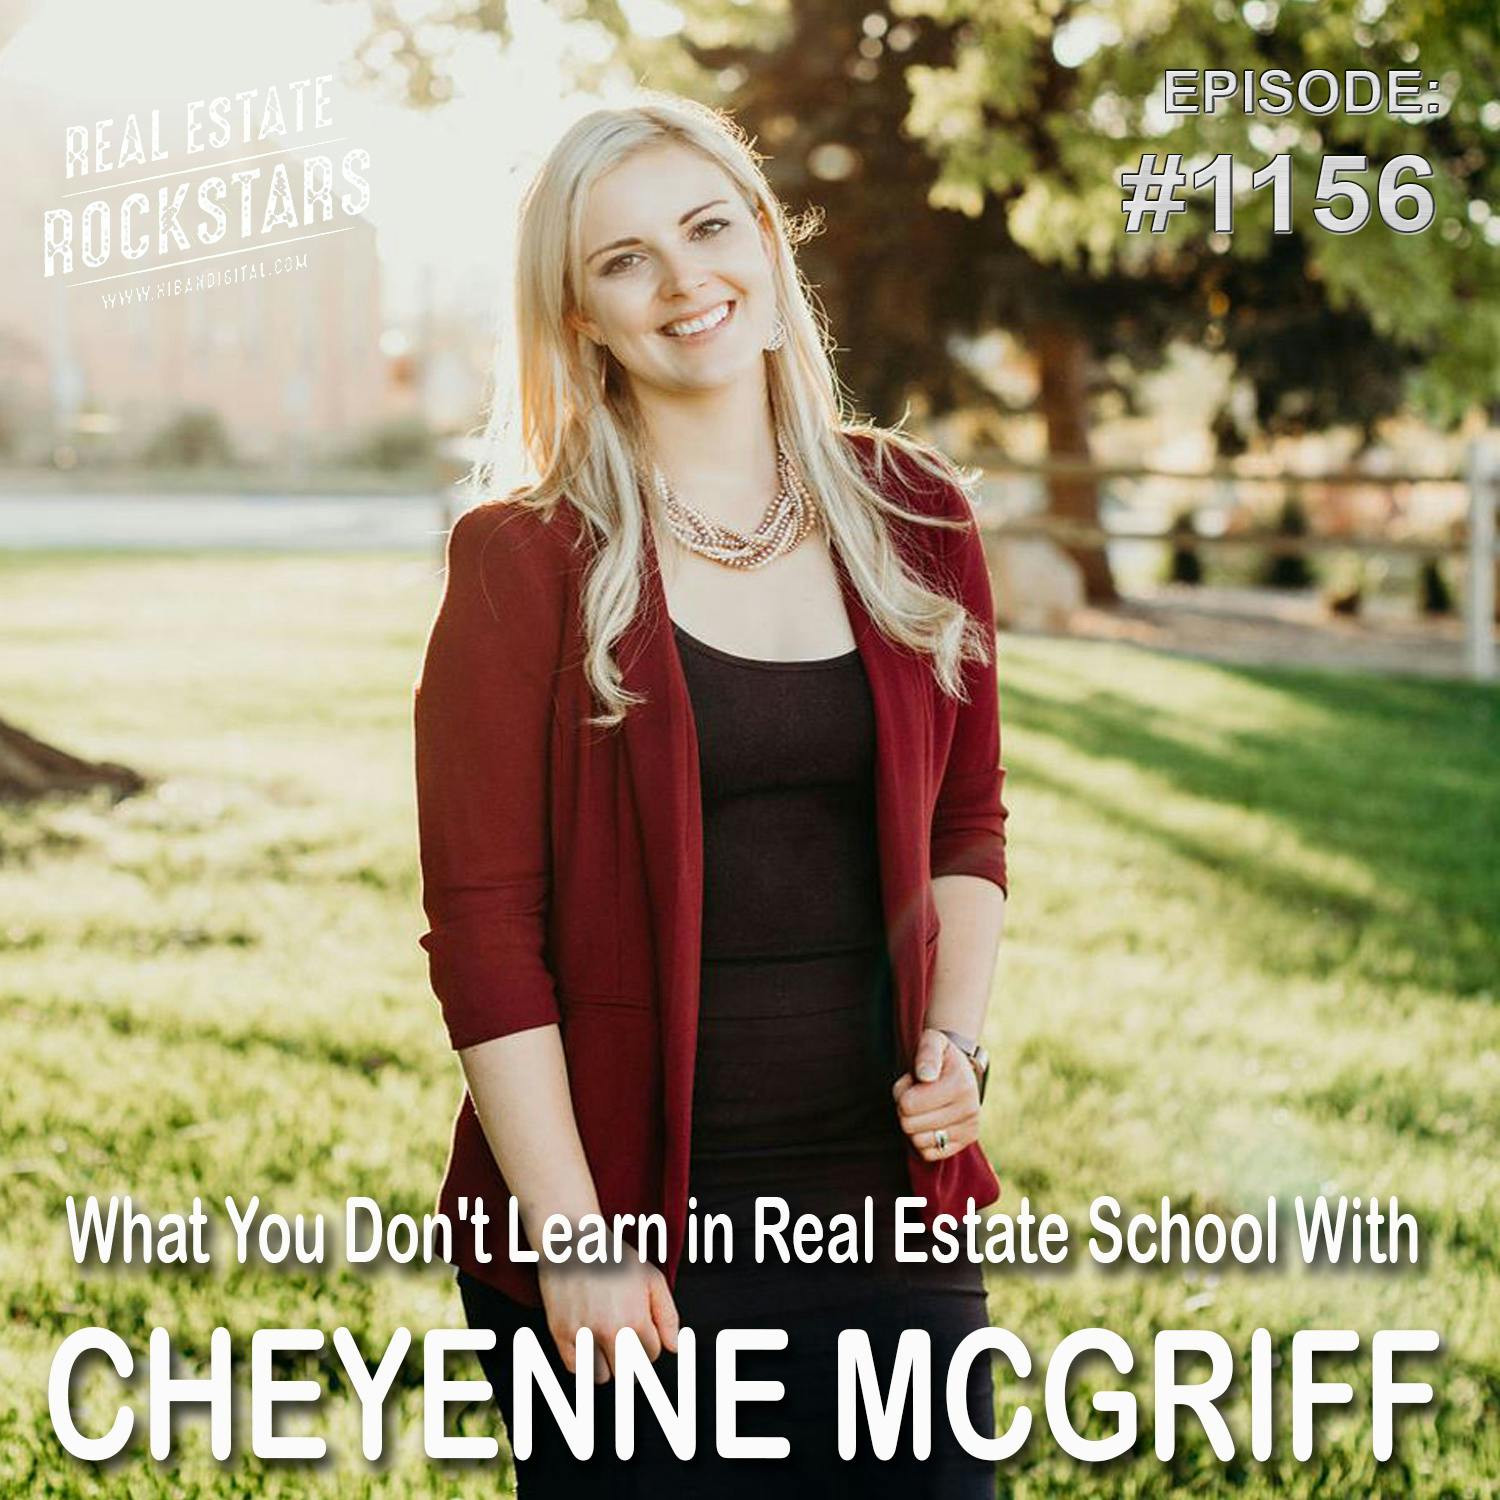 1156: What You Don’t Learn in Real Estate School With Cheyenne McGriff